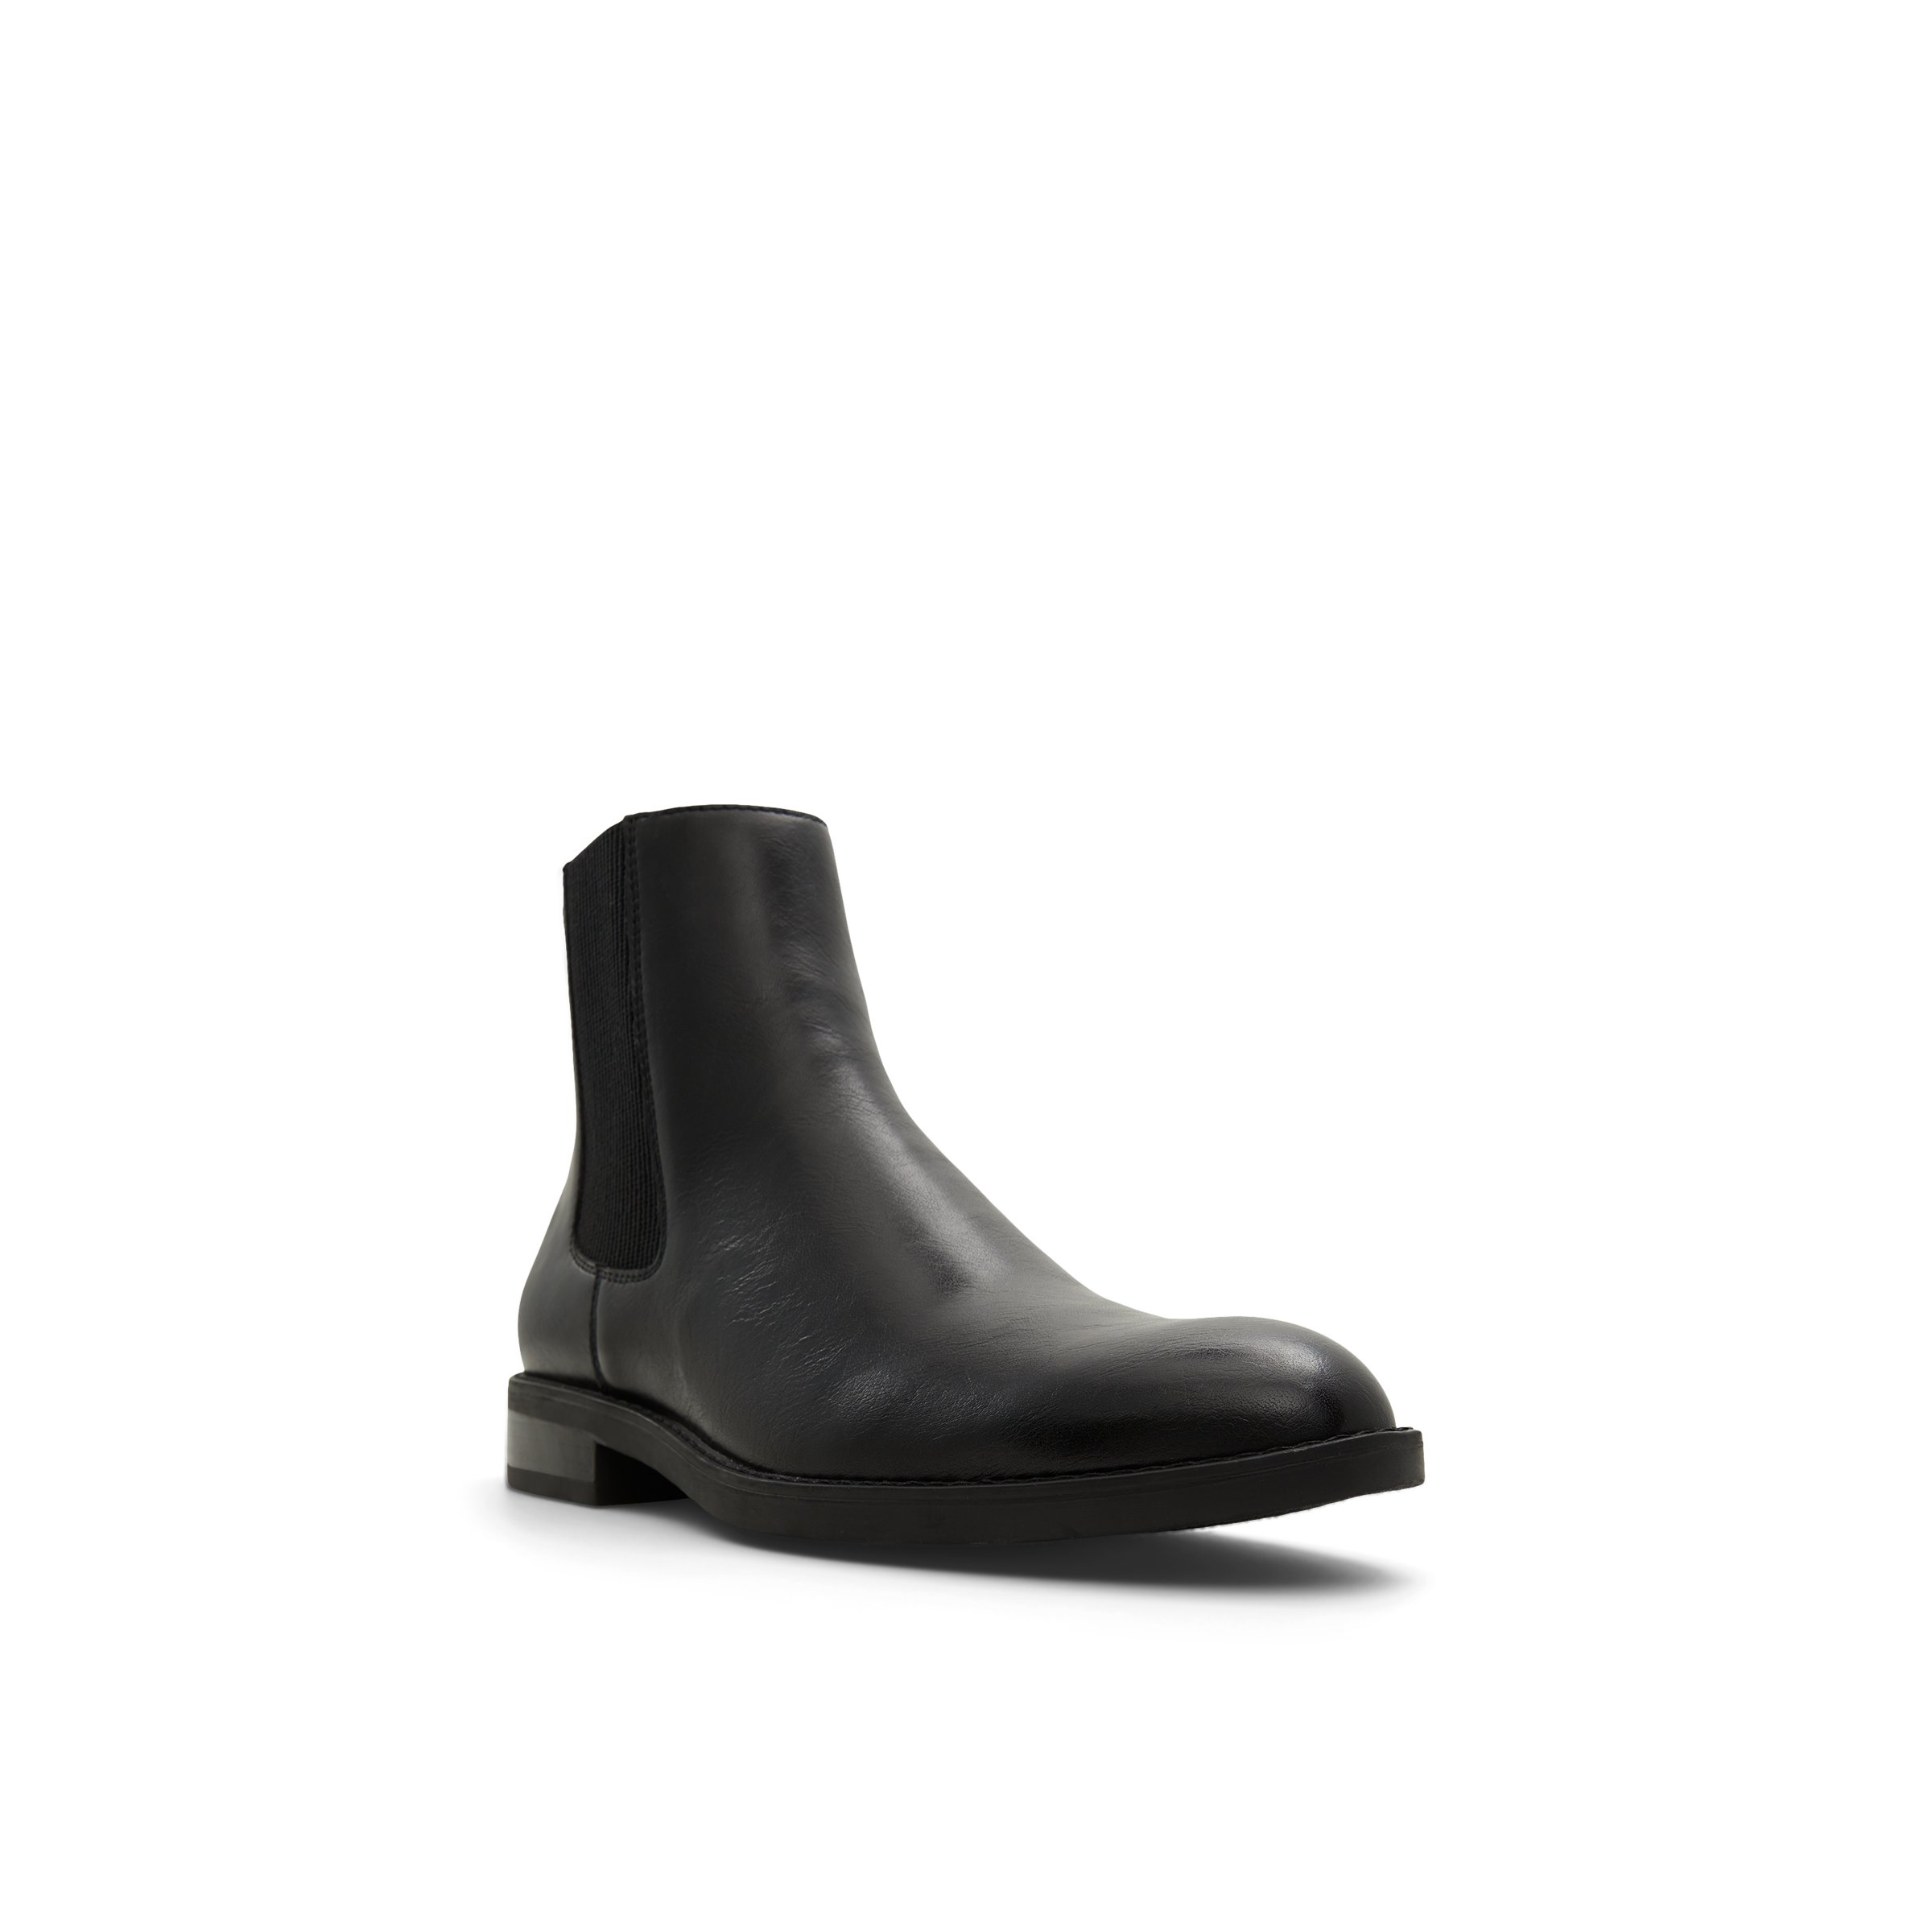 Gloadon Other Black Men's Dress Boots | Call It Spring Canada